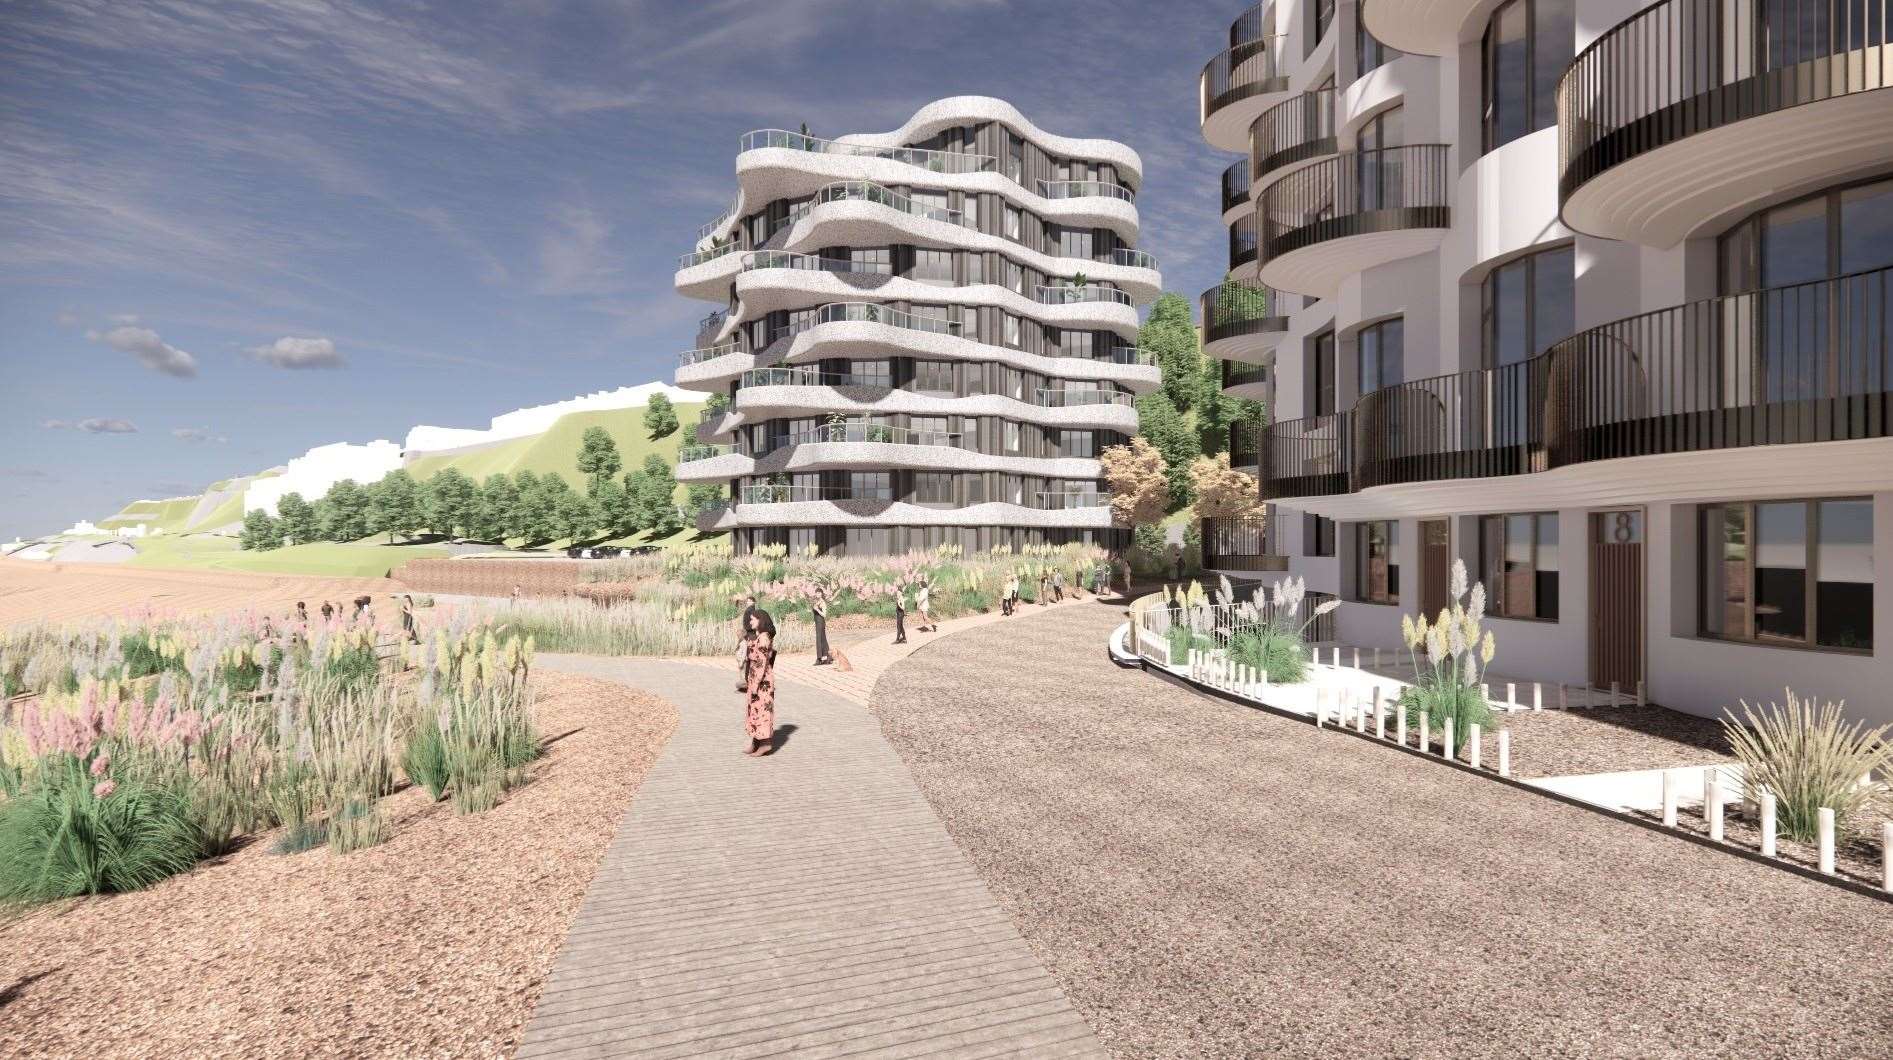 More flats planned as part of the Folkestone seafront masterplan. Picture: Folkestone Harbour & Seafront Development Company